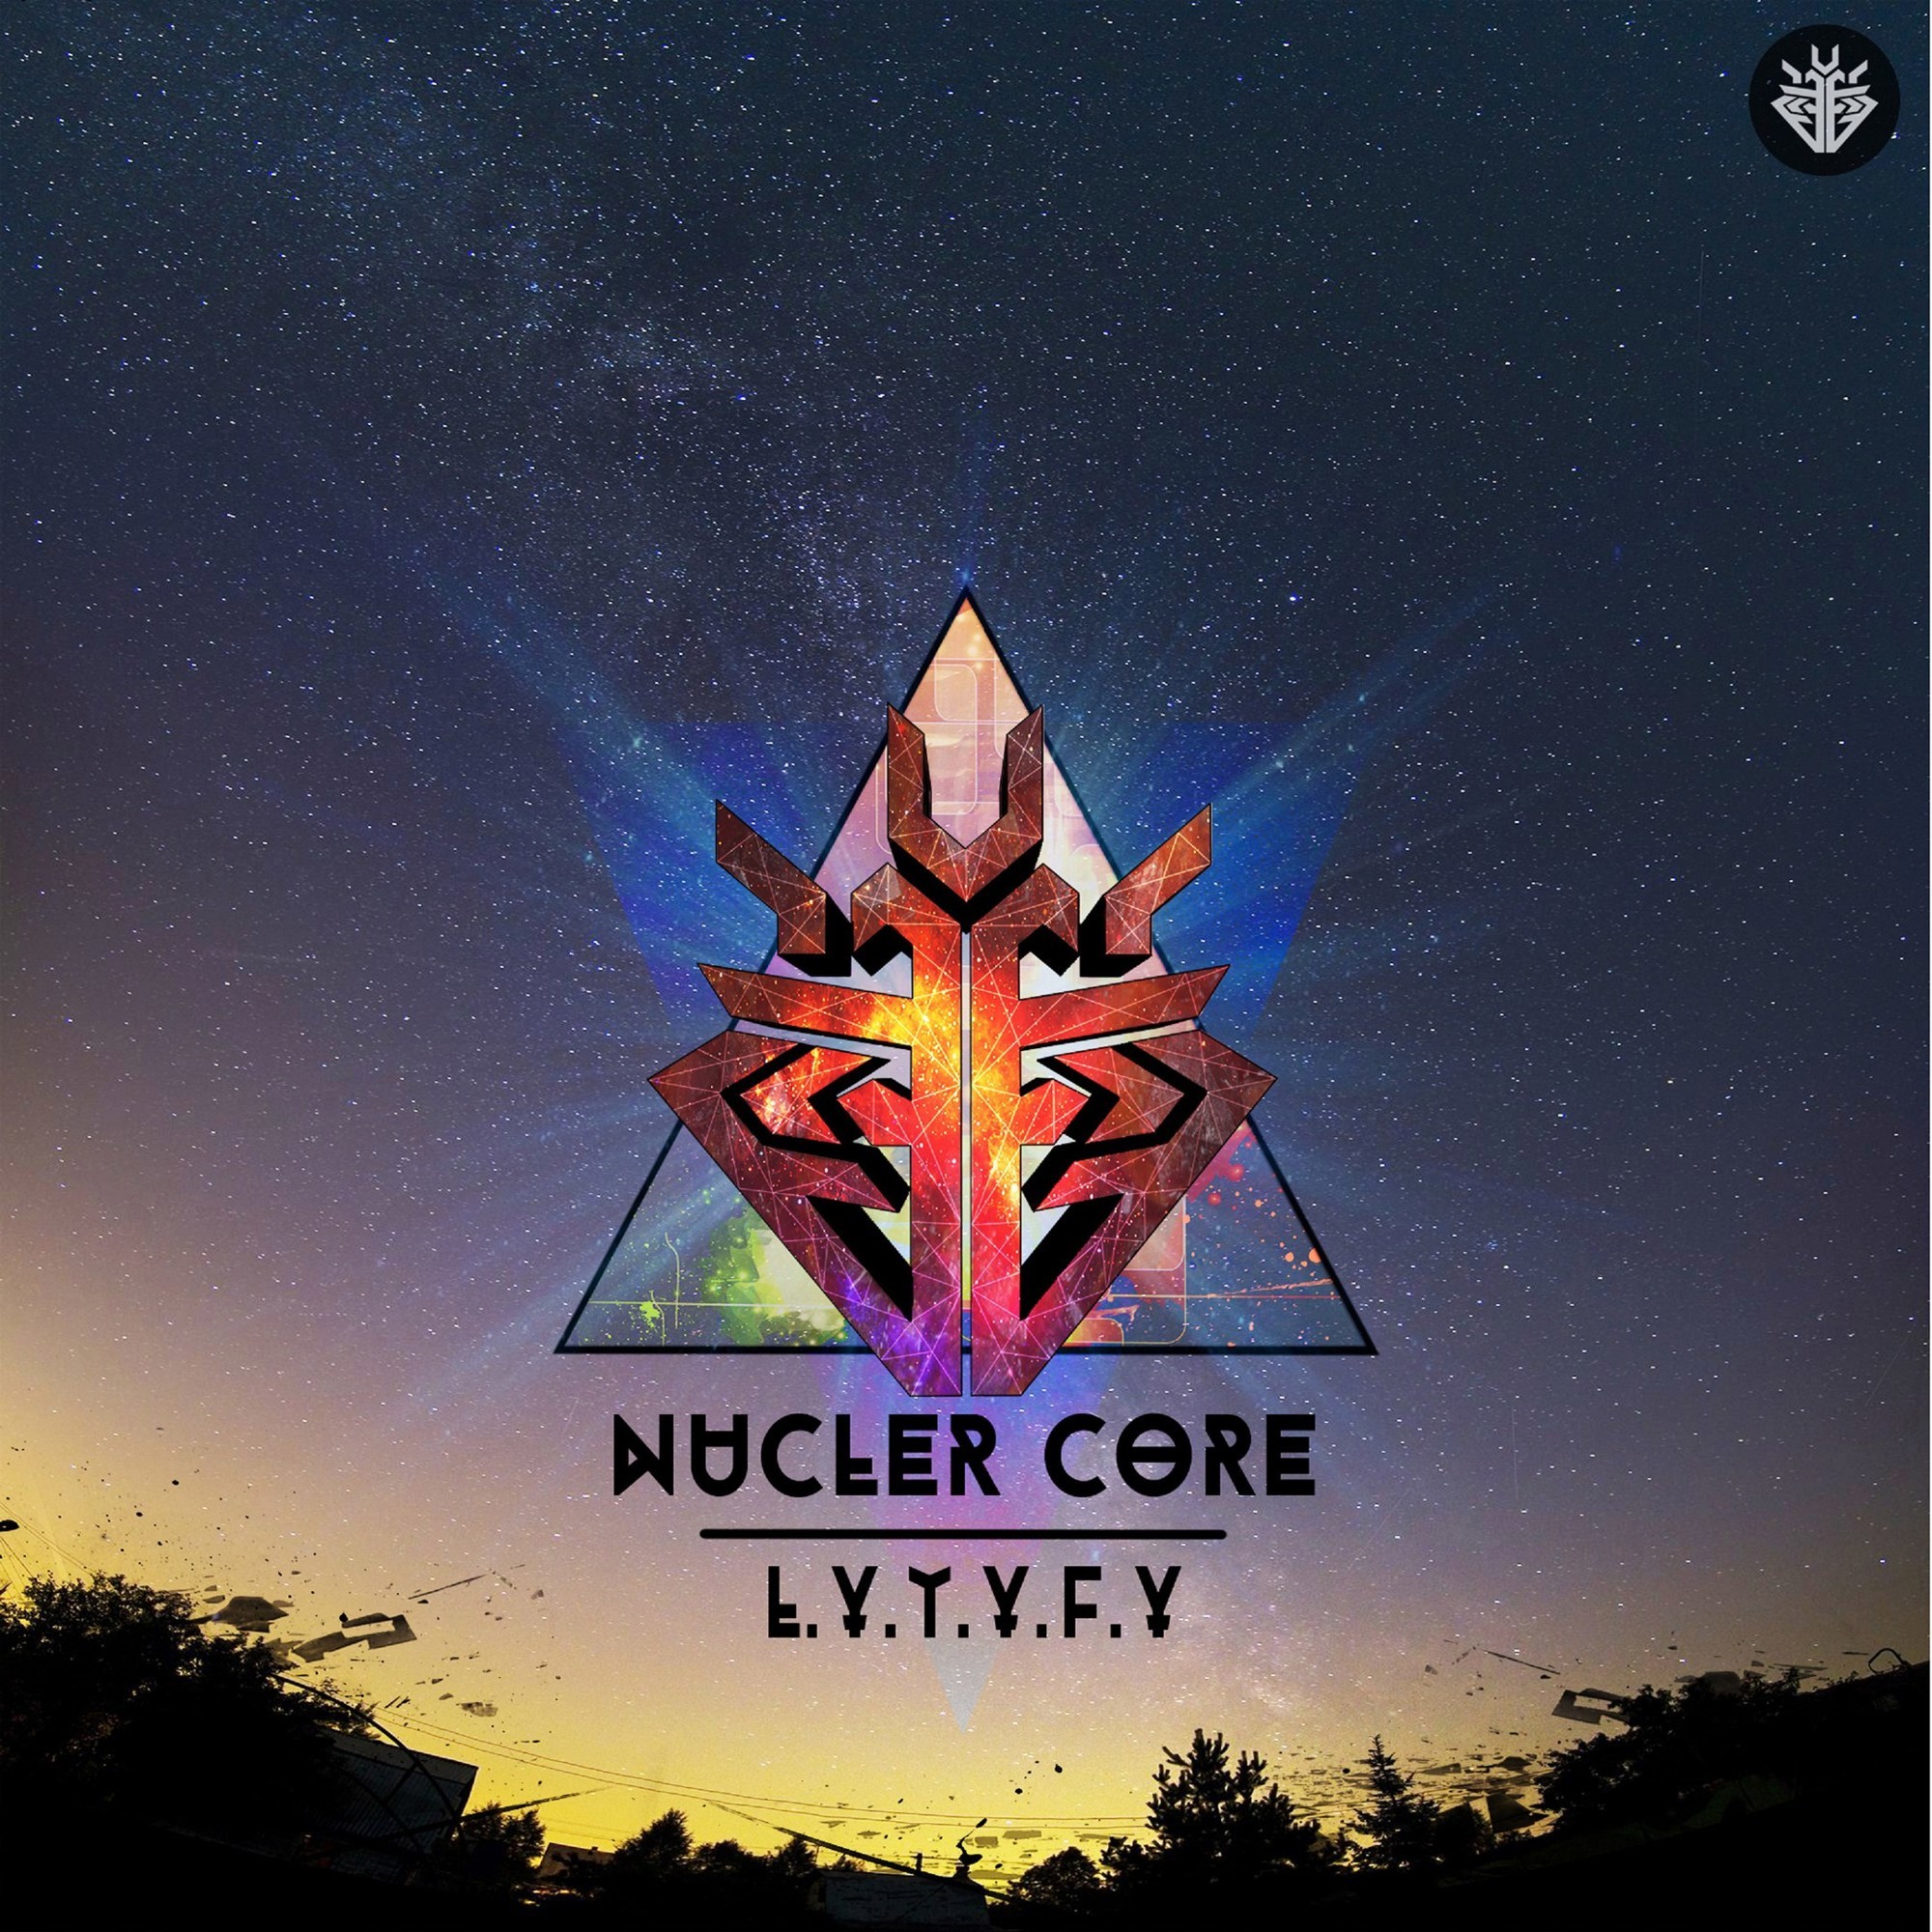 Nuclear Core. Only core